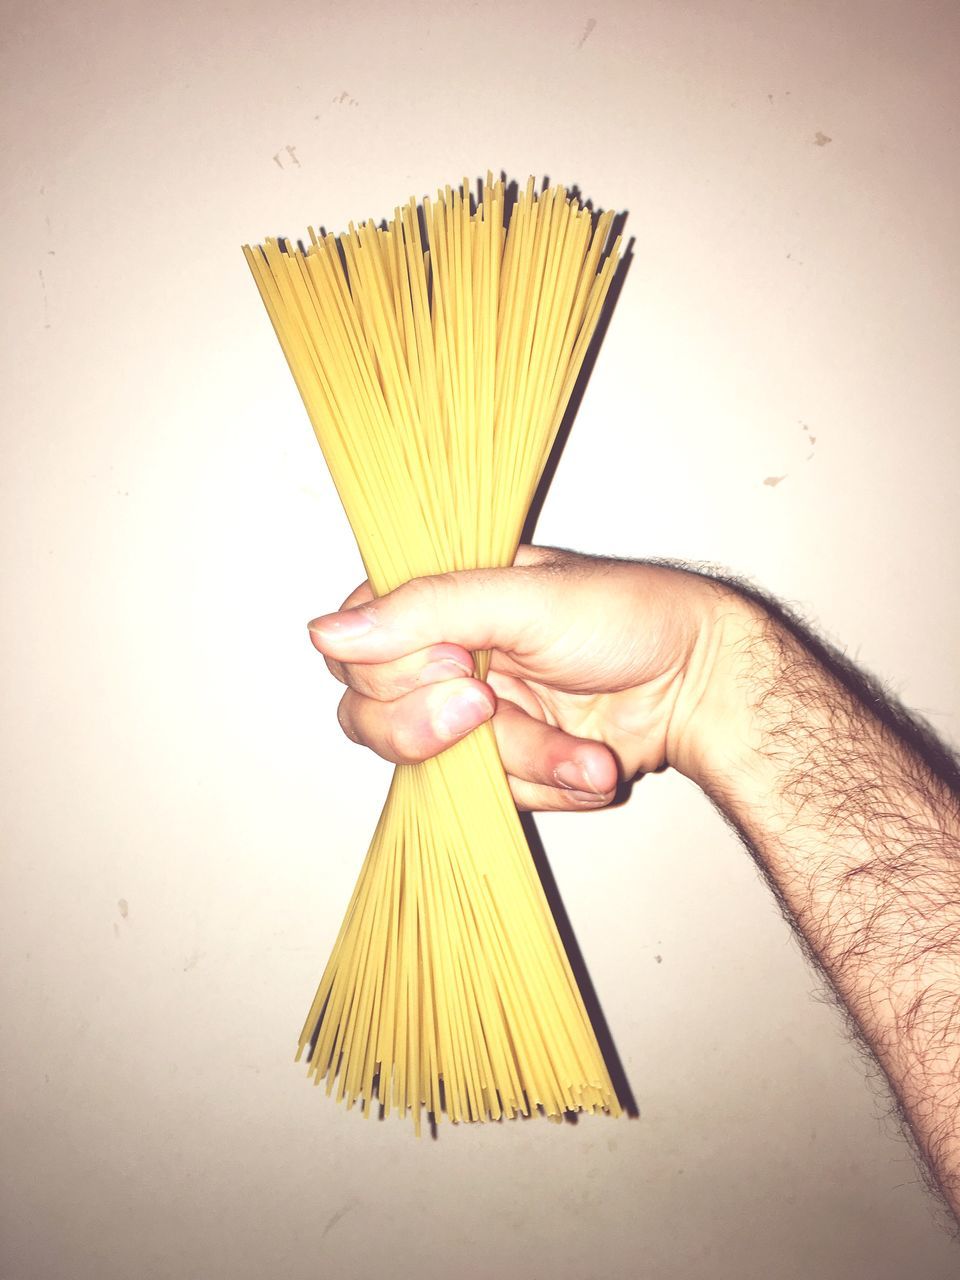 pasta, human hand, spaghetti, holding, food and drink, one person, human body part, food, italian food, real people, healthy eating, bundle, indoors